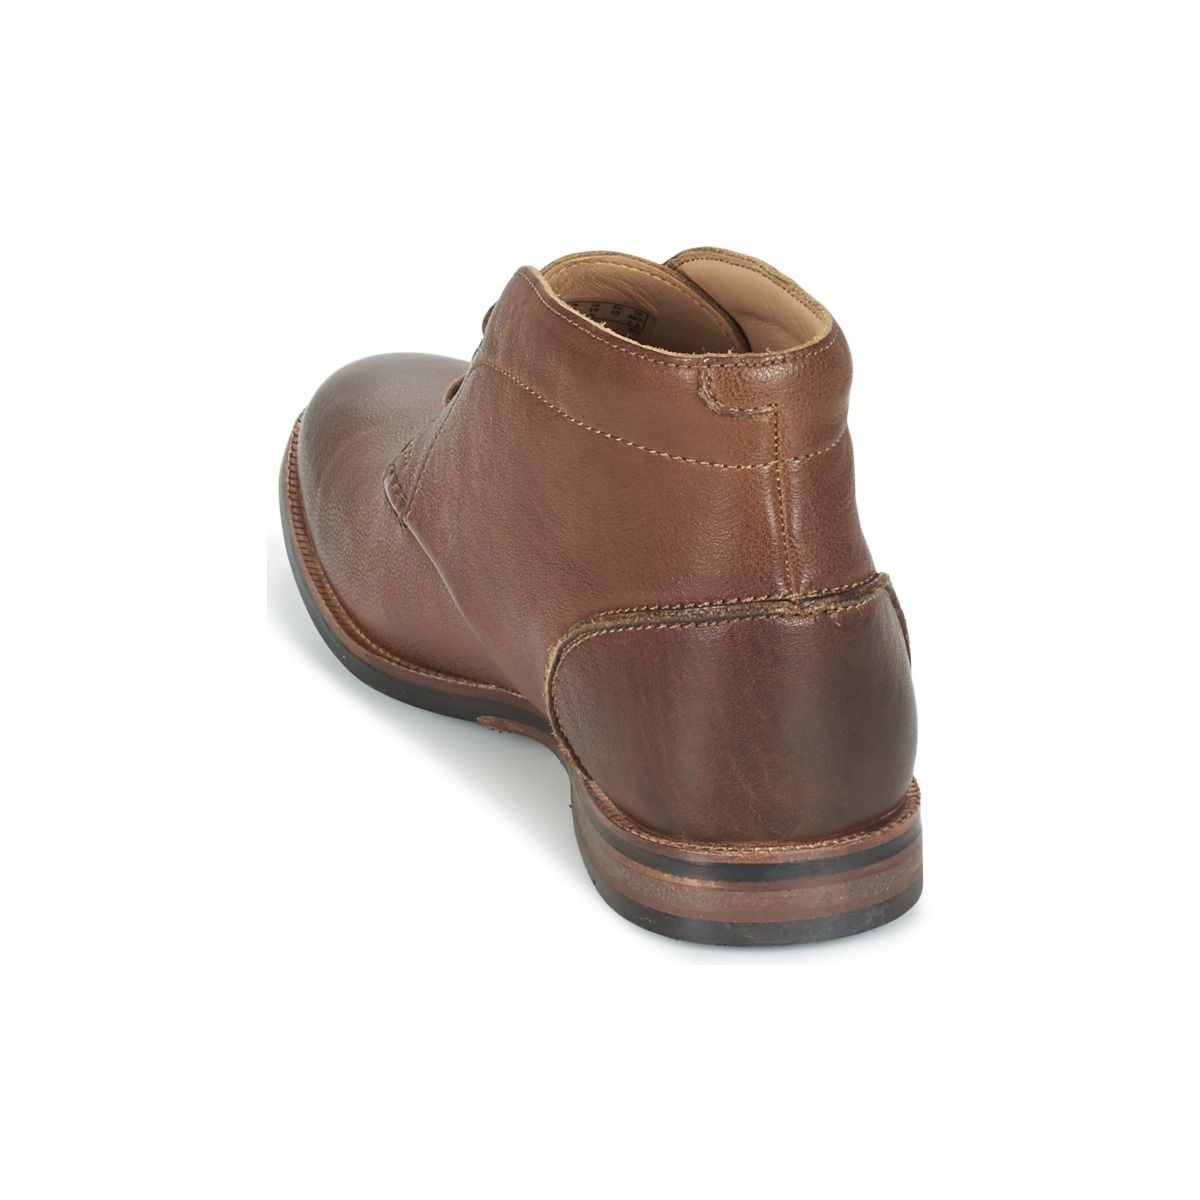 Clarks Broyd 23858 (Tan) Milano Shoes